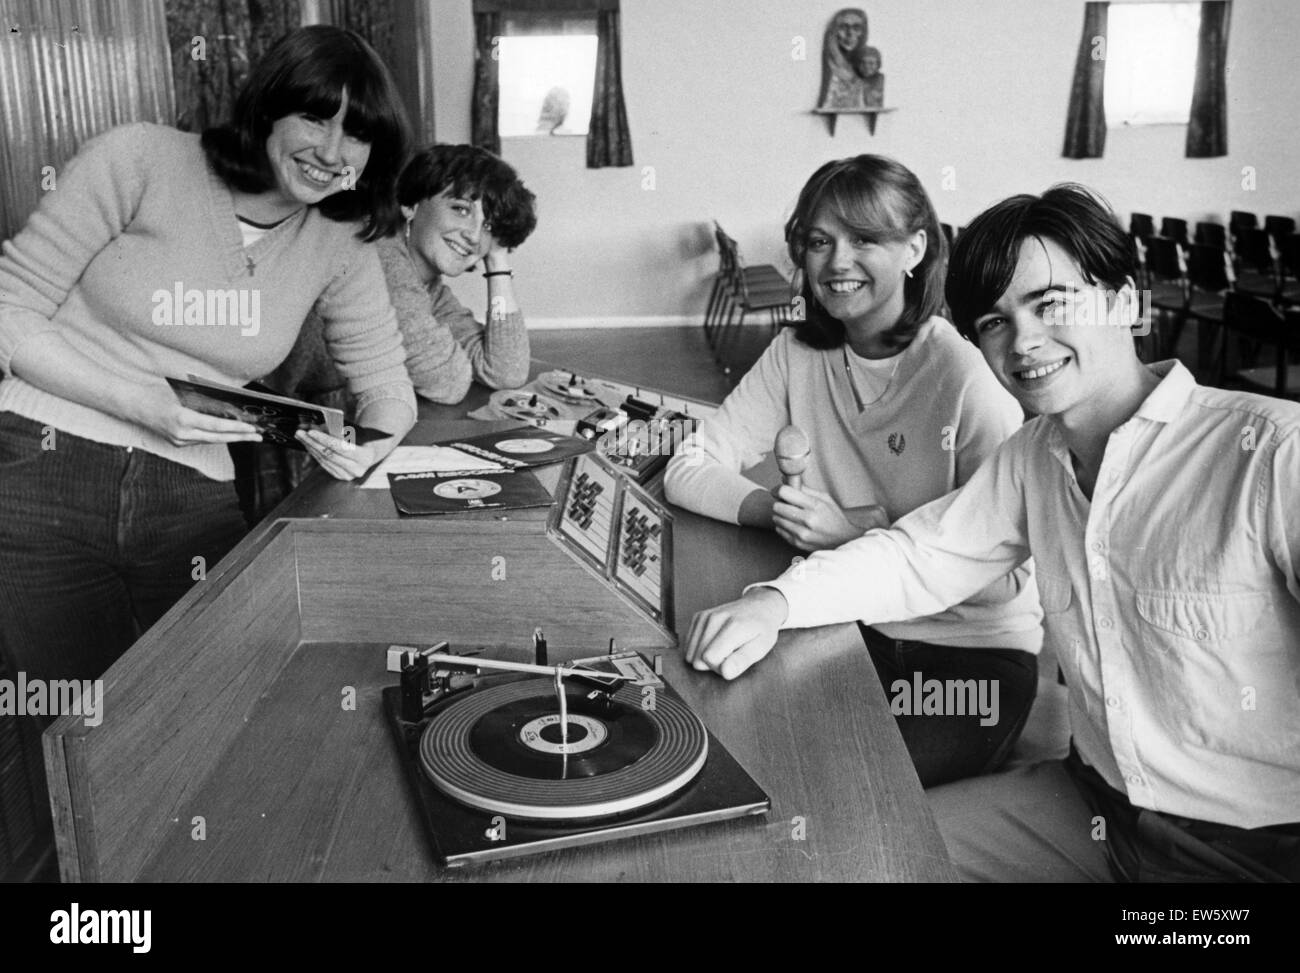 Students from St Mary's Sixth Form College, Middlesbrough, 7th July 1981. They run their very own radio station, SM6, broadcasting since last October. Left to Right, Ann Smith, Joanne McCurley, Station manager Tracy Bousfield and Stephen Hunnensett. Stock Photo